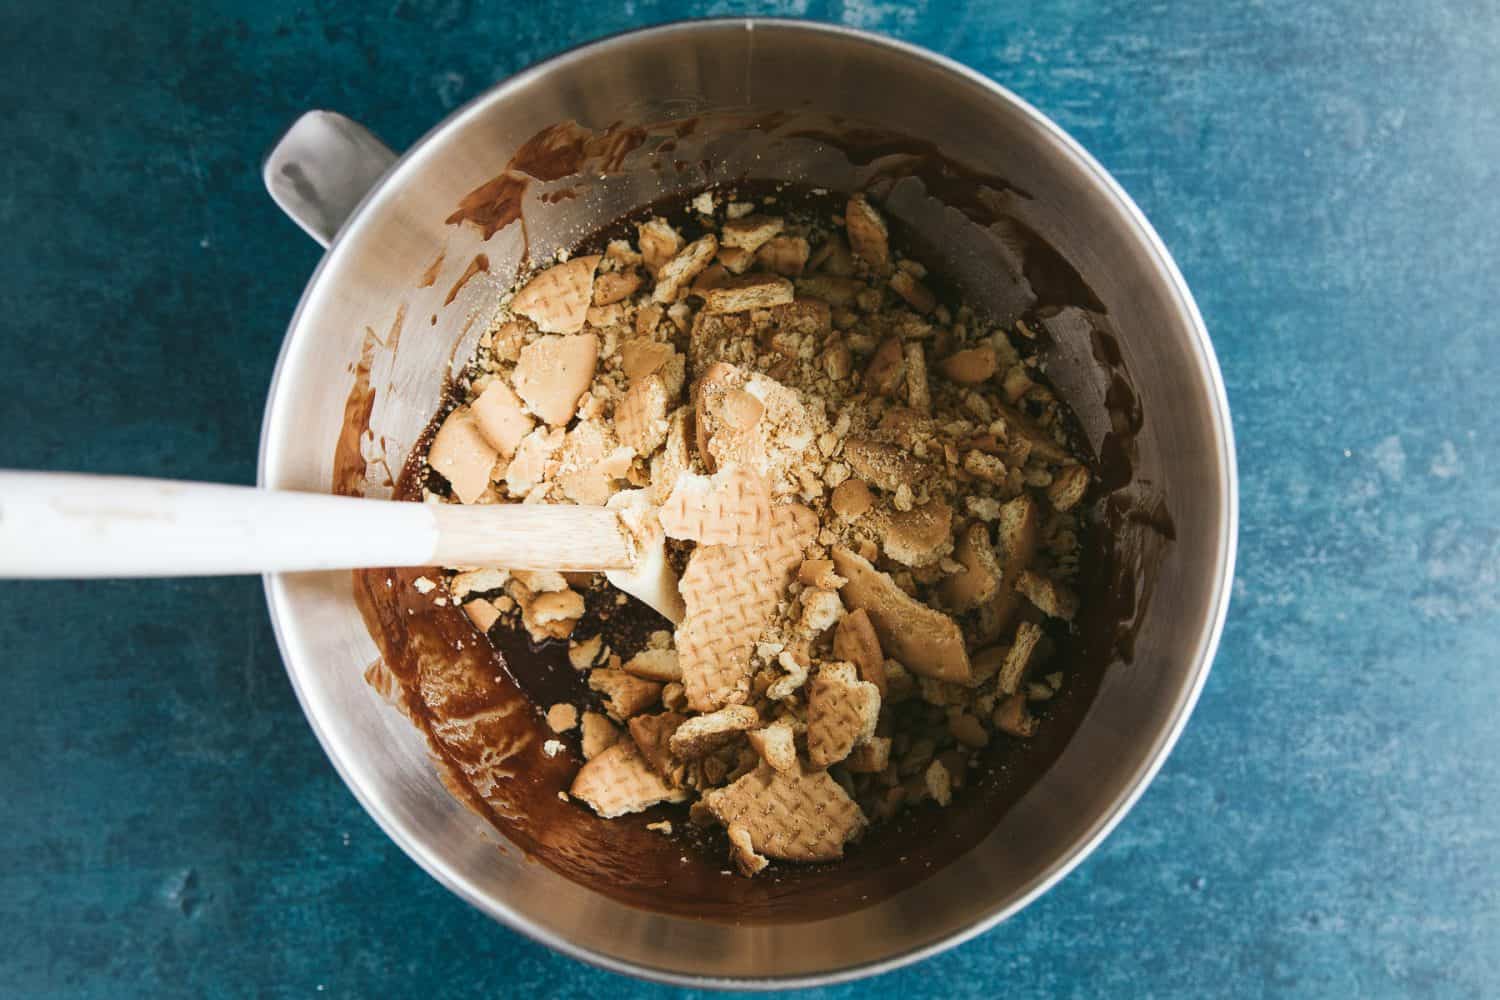 A mixing bowl filled with crushed biscuits and melted chocolate. 